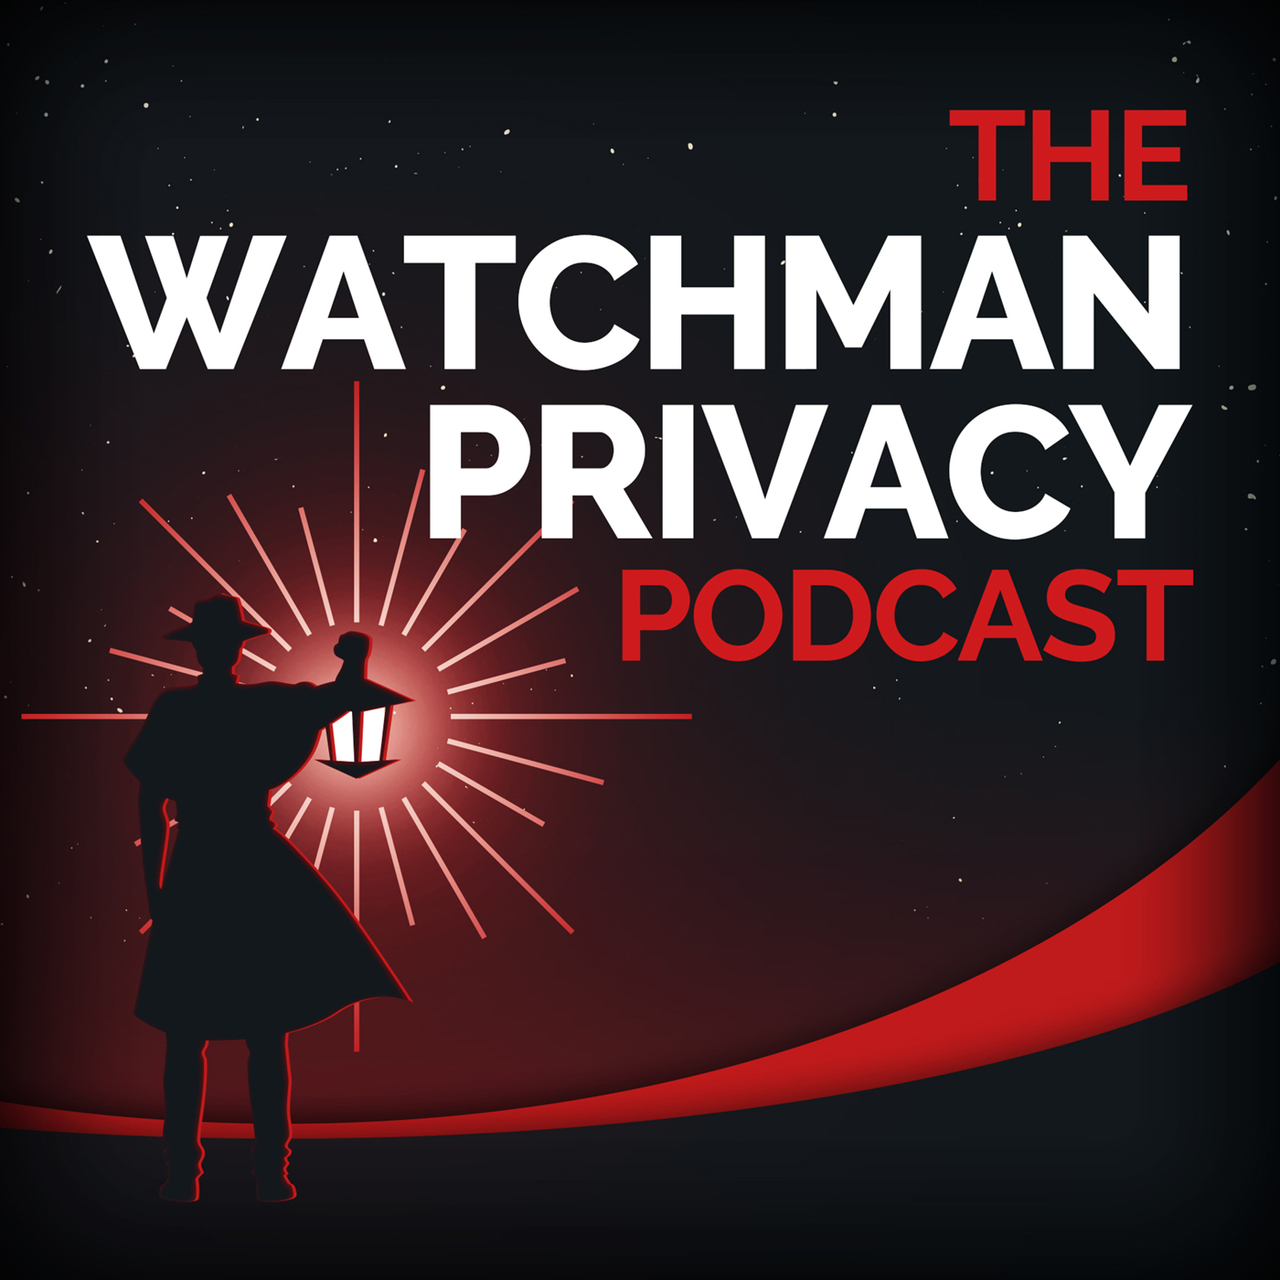 The Watchman Privacy Newsletter